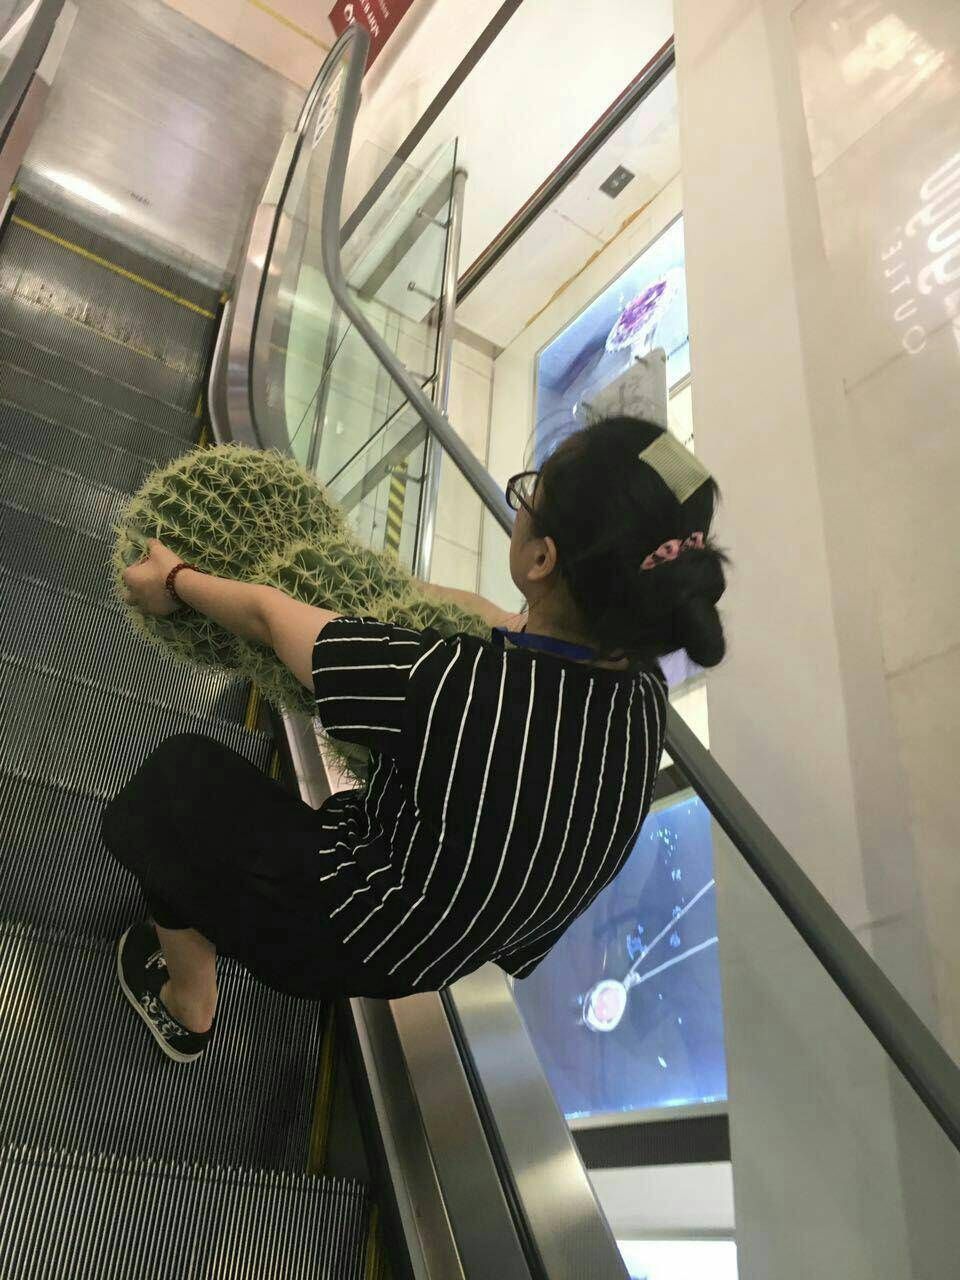 This woman is carrying a cactus with bare hands